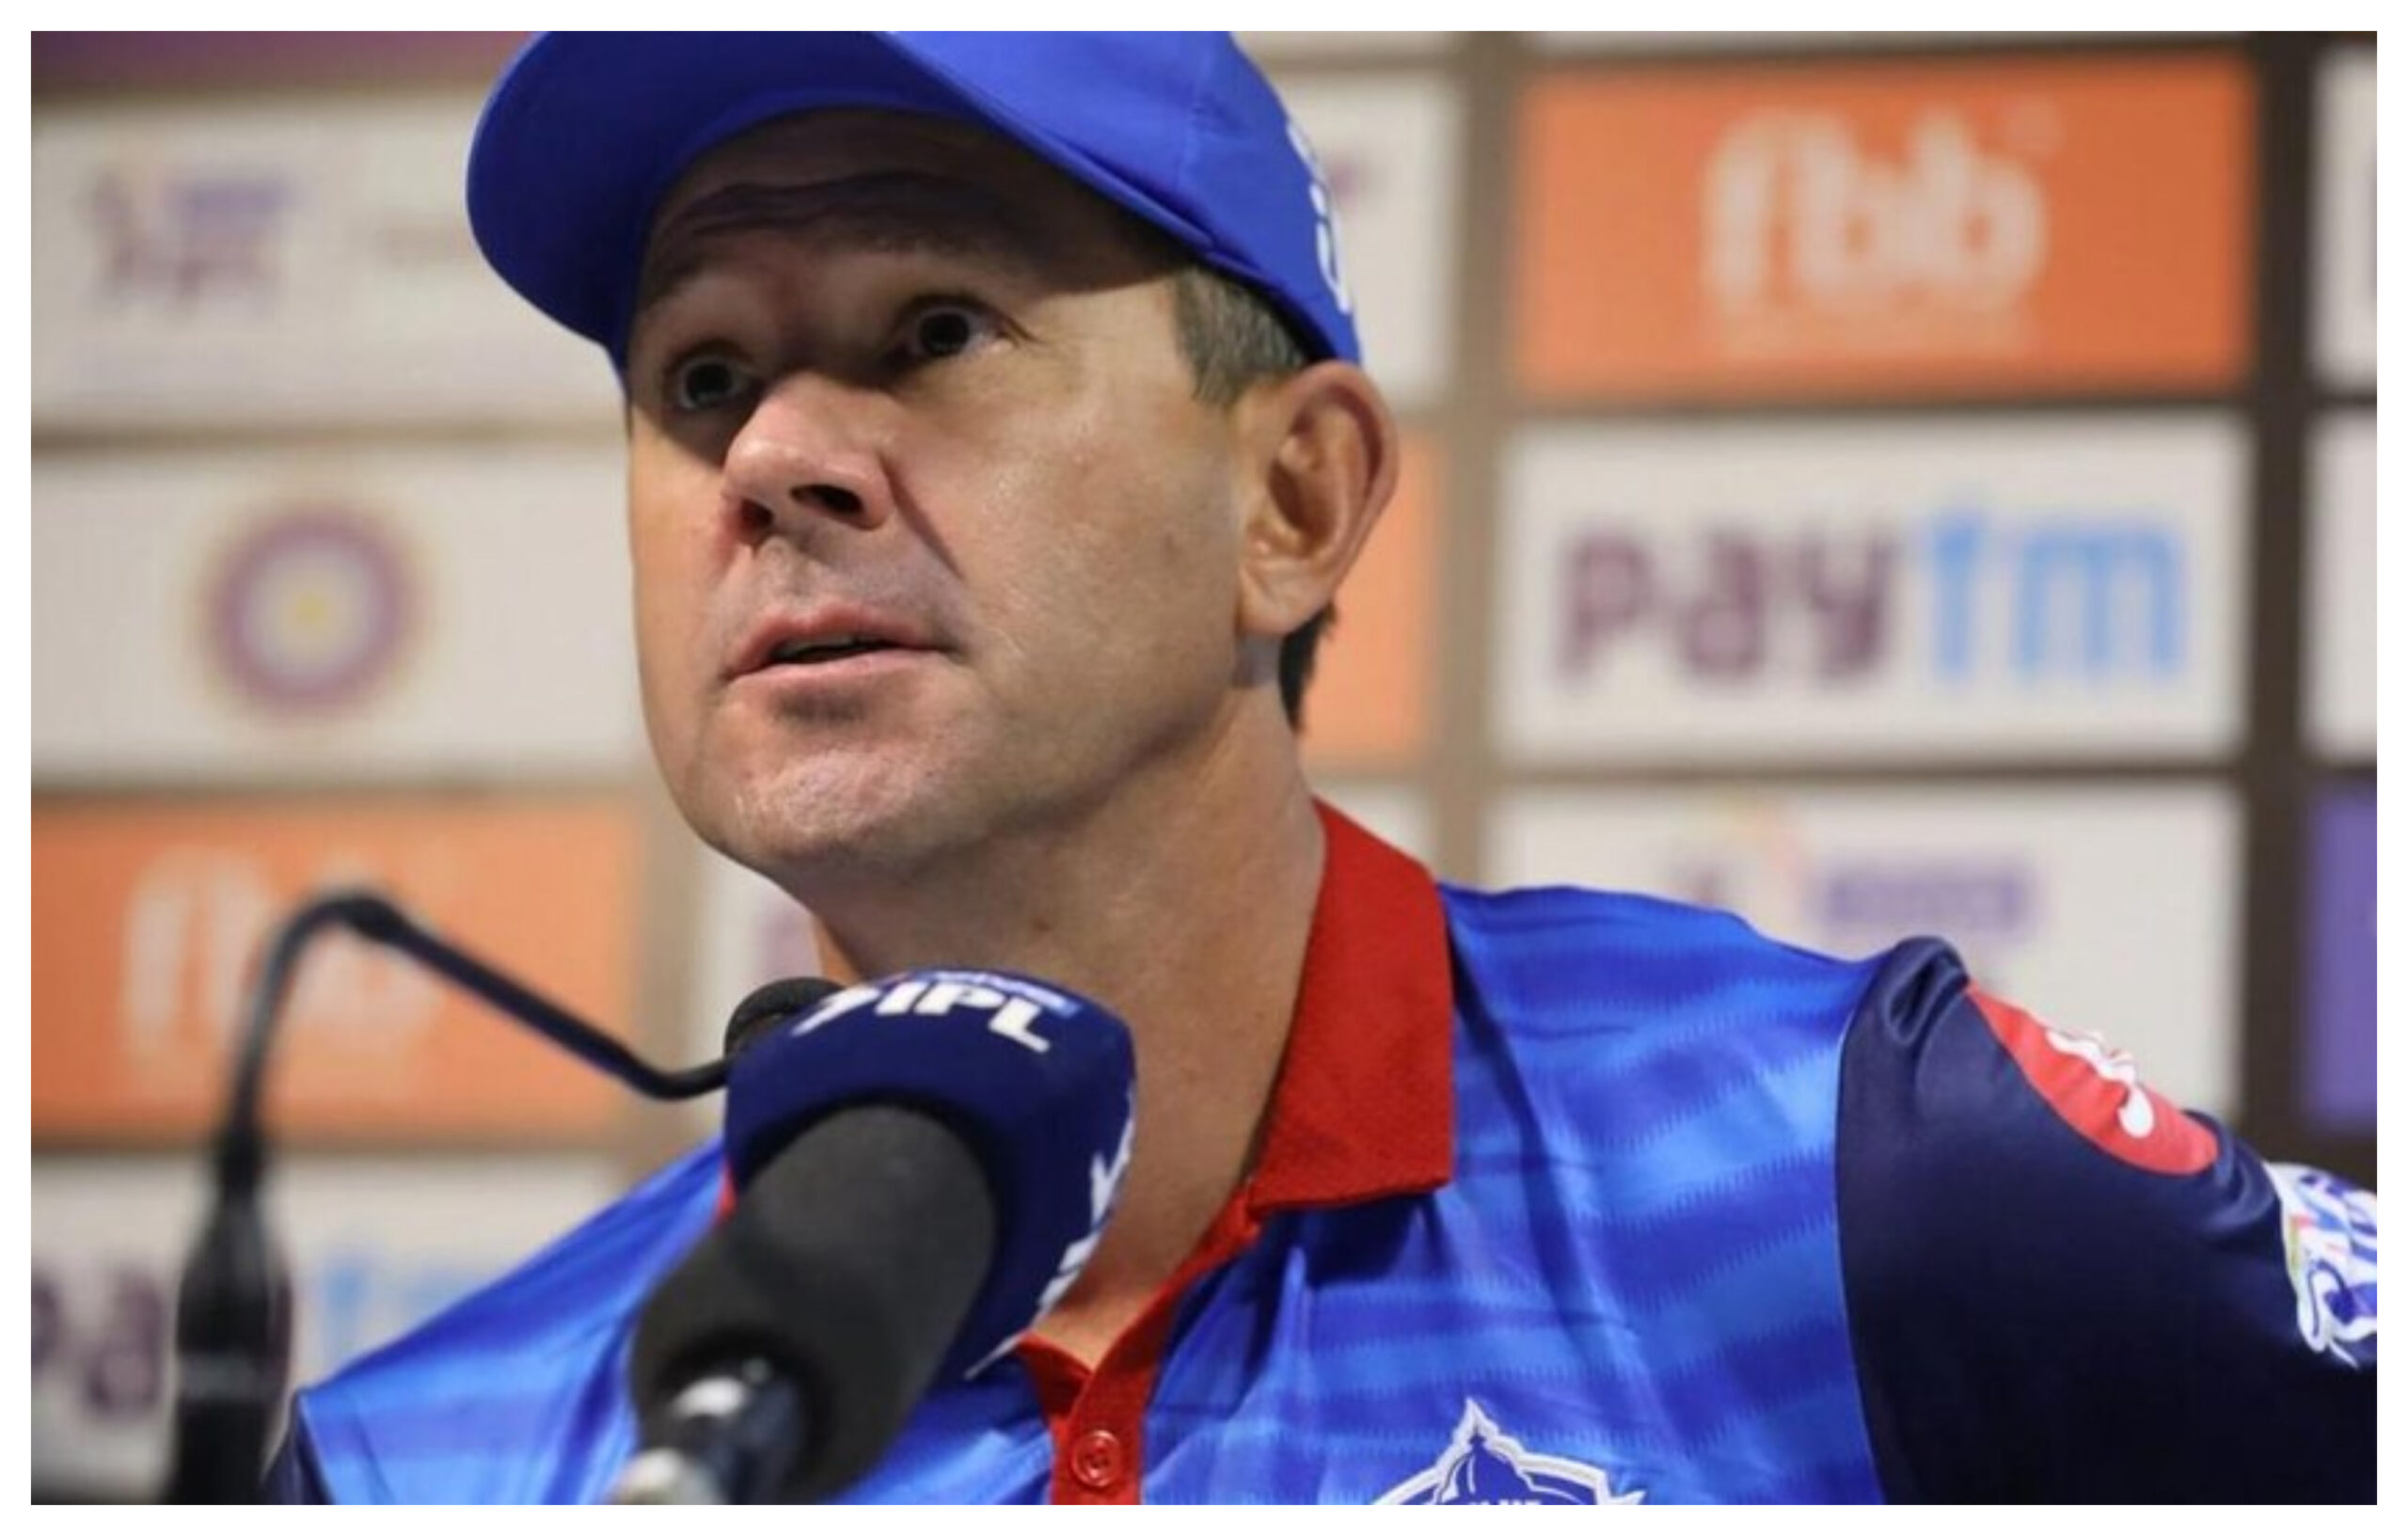 Visakhapatnam: Ricky Ponting disappointed with the carelessness of the team, said the shortcomings need to be rectified soon, IPL, Delhi Capitals, Kolkata, Sports, Totltv news in hindi,